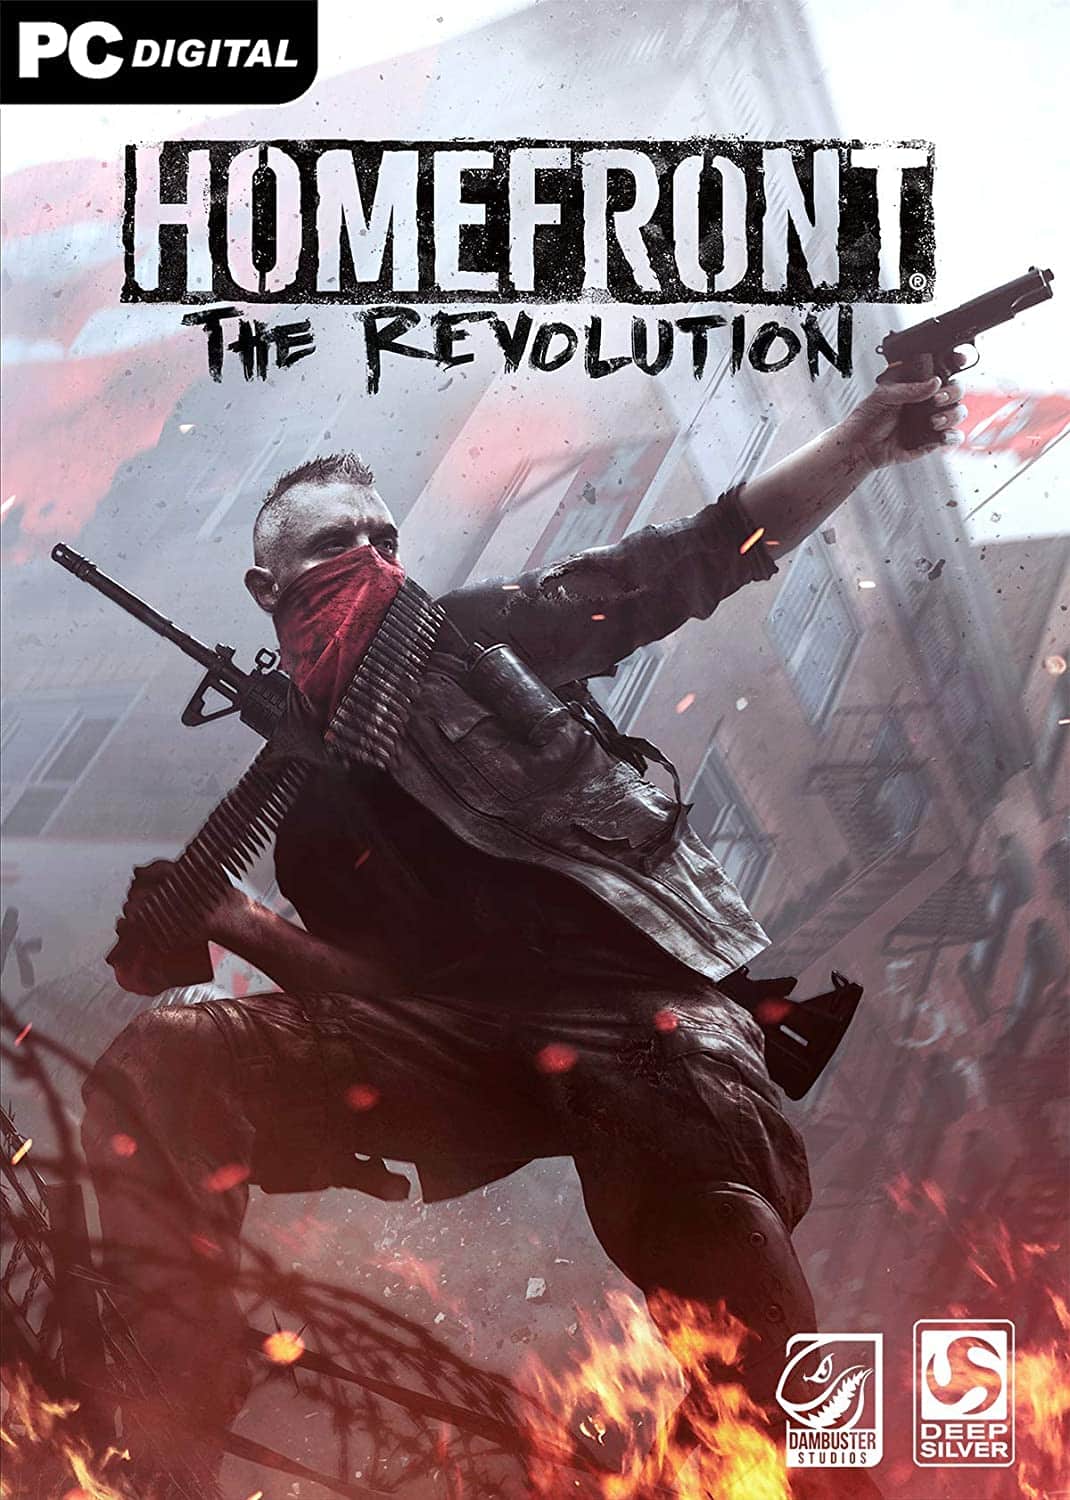 Homefront: The Revolution player count stats